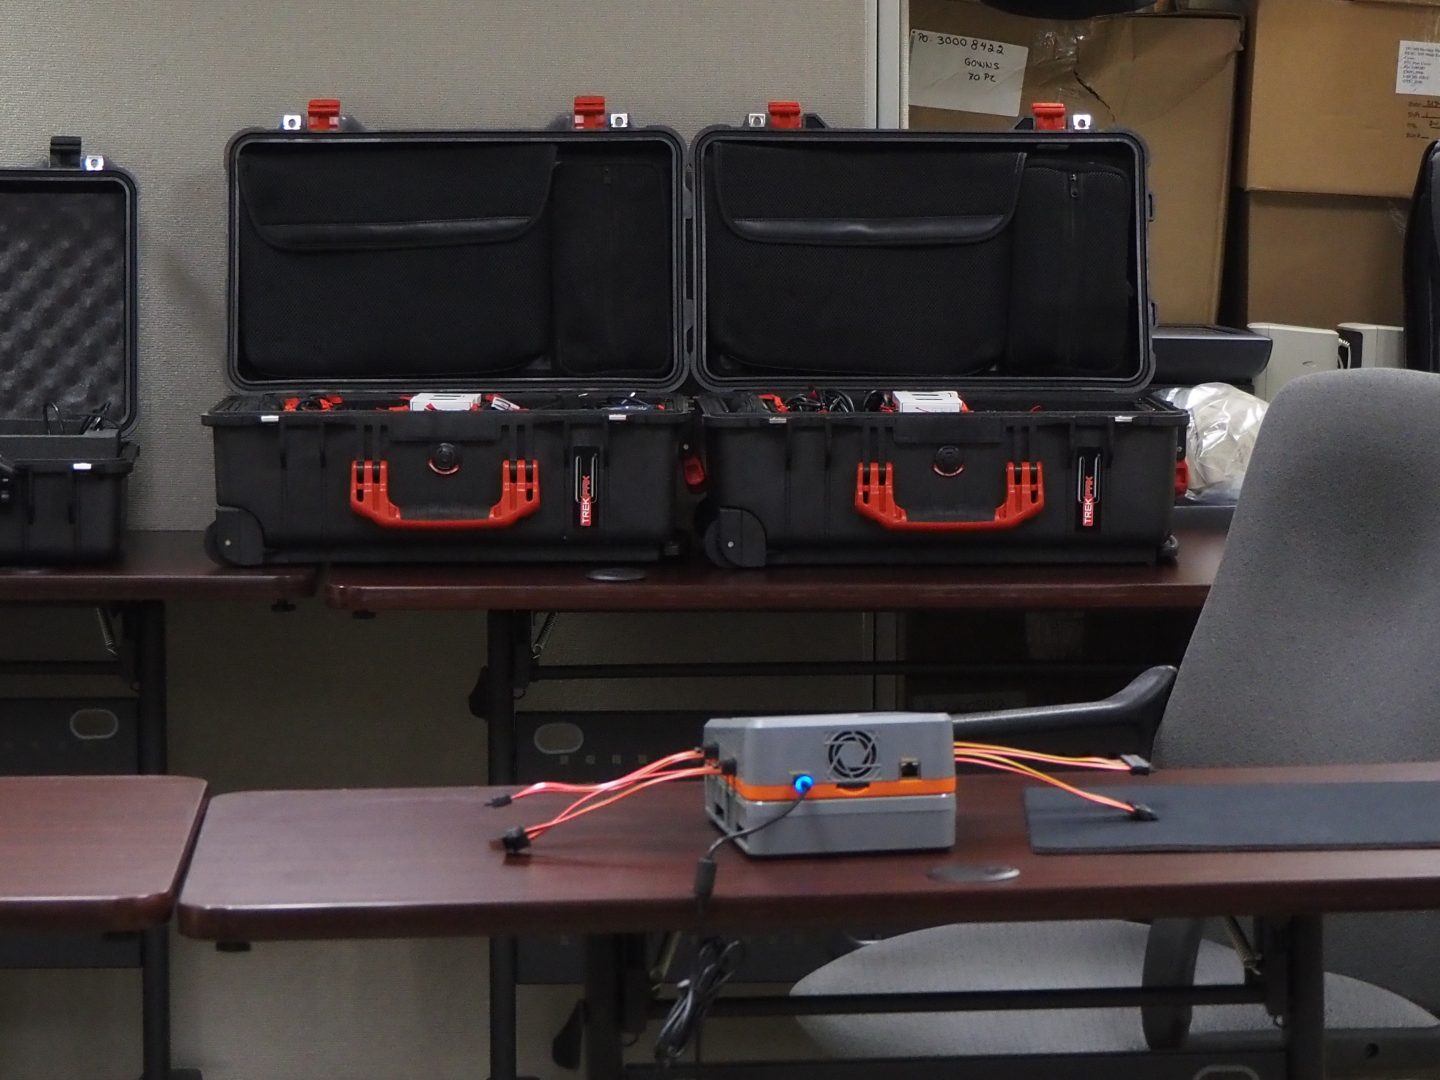 Unidentified equipment purportedly to be used in an inspection of Fulton County's 2020 voting machines on Jan. 14, 2022. The inspection did not proceed as planned after the Pa. Supreme Court ordered a halt.